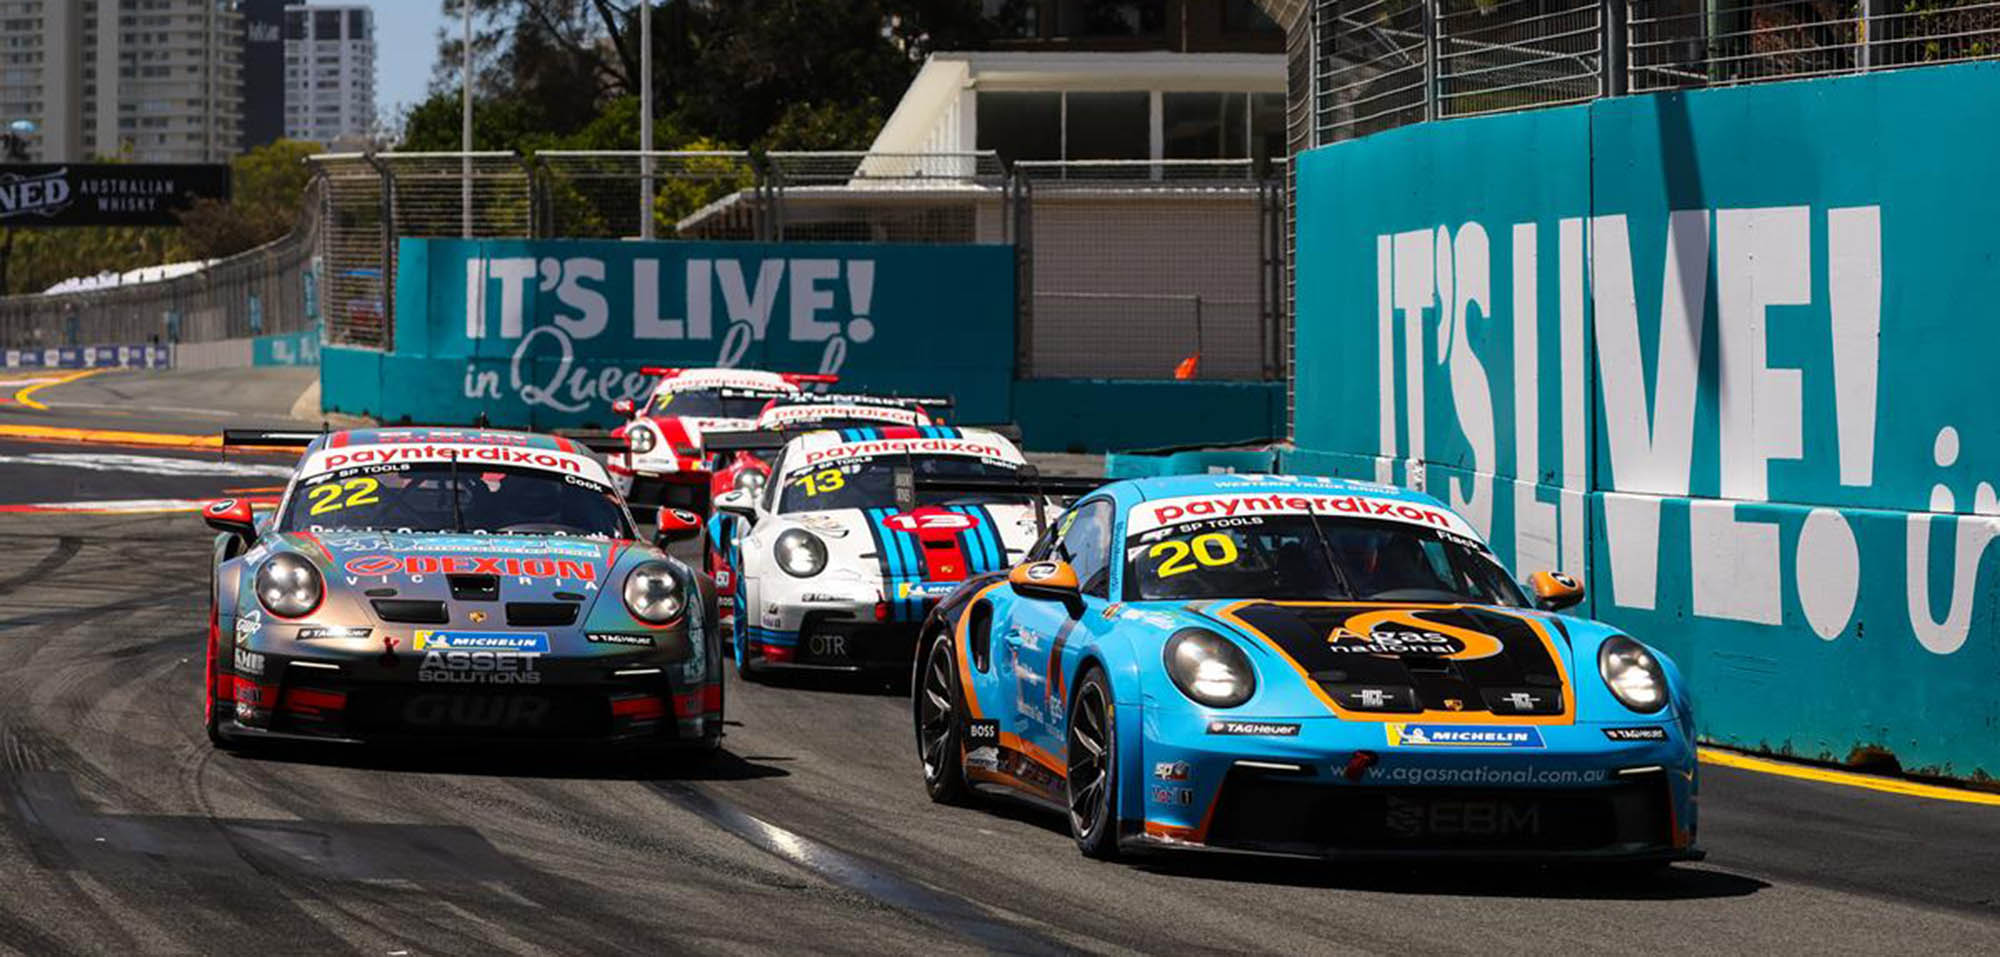 carrera cup title fight to go down to the wire